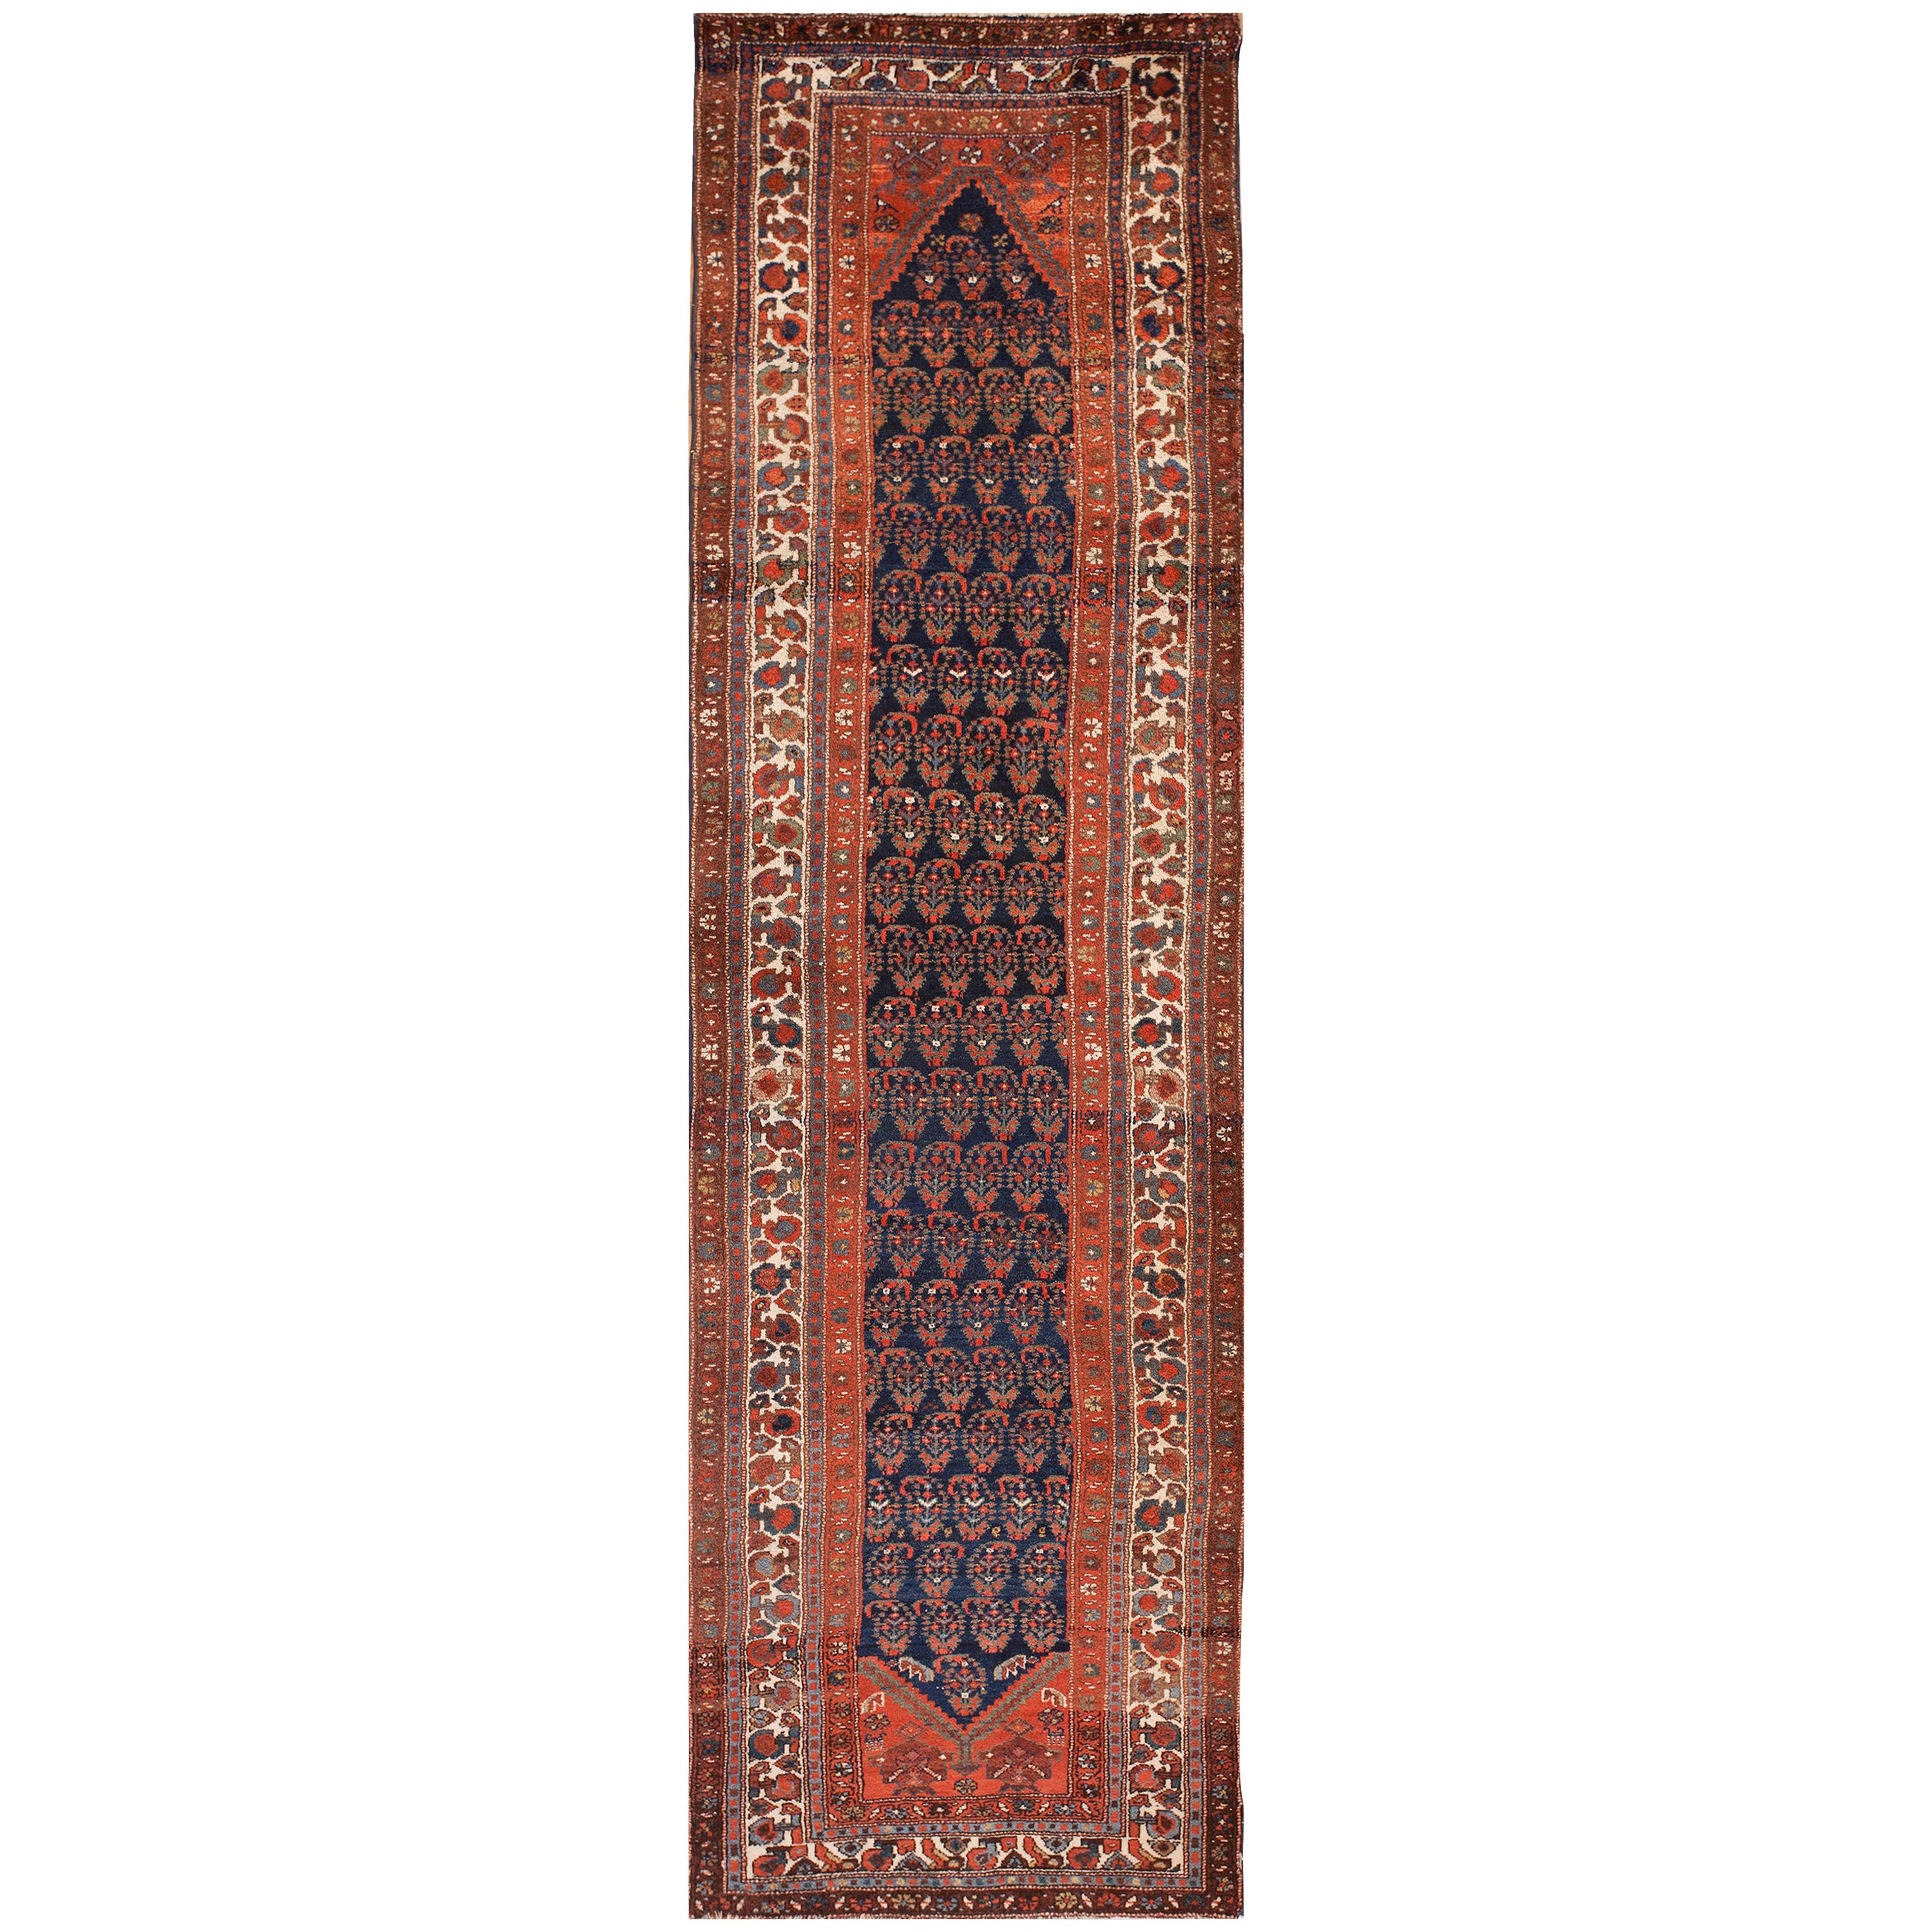 Early 20th Century Persian Malayer Carpet ( 3' x 10'2" - 92 x 310 ) For Sale